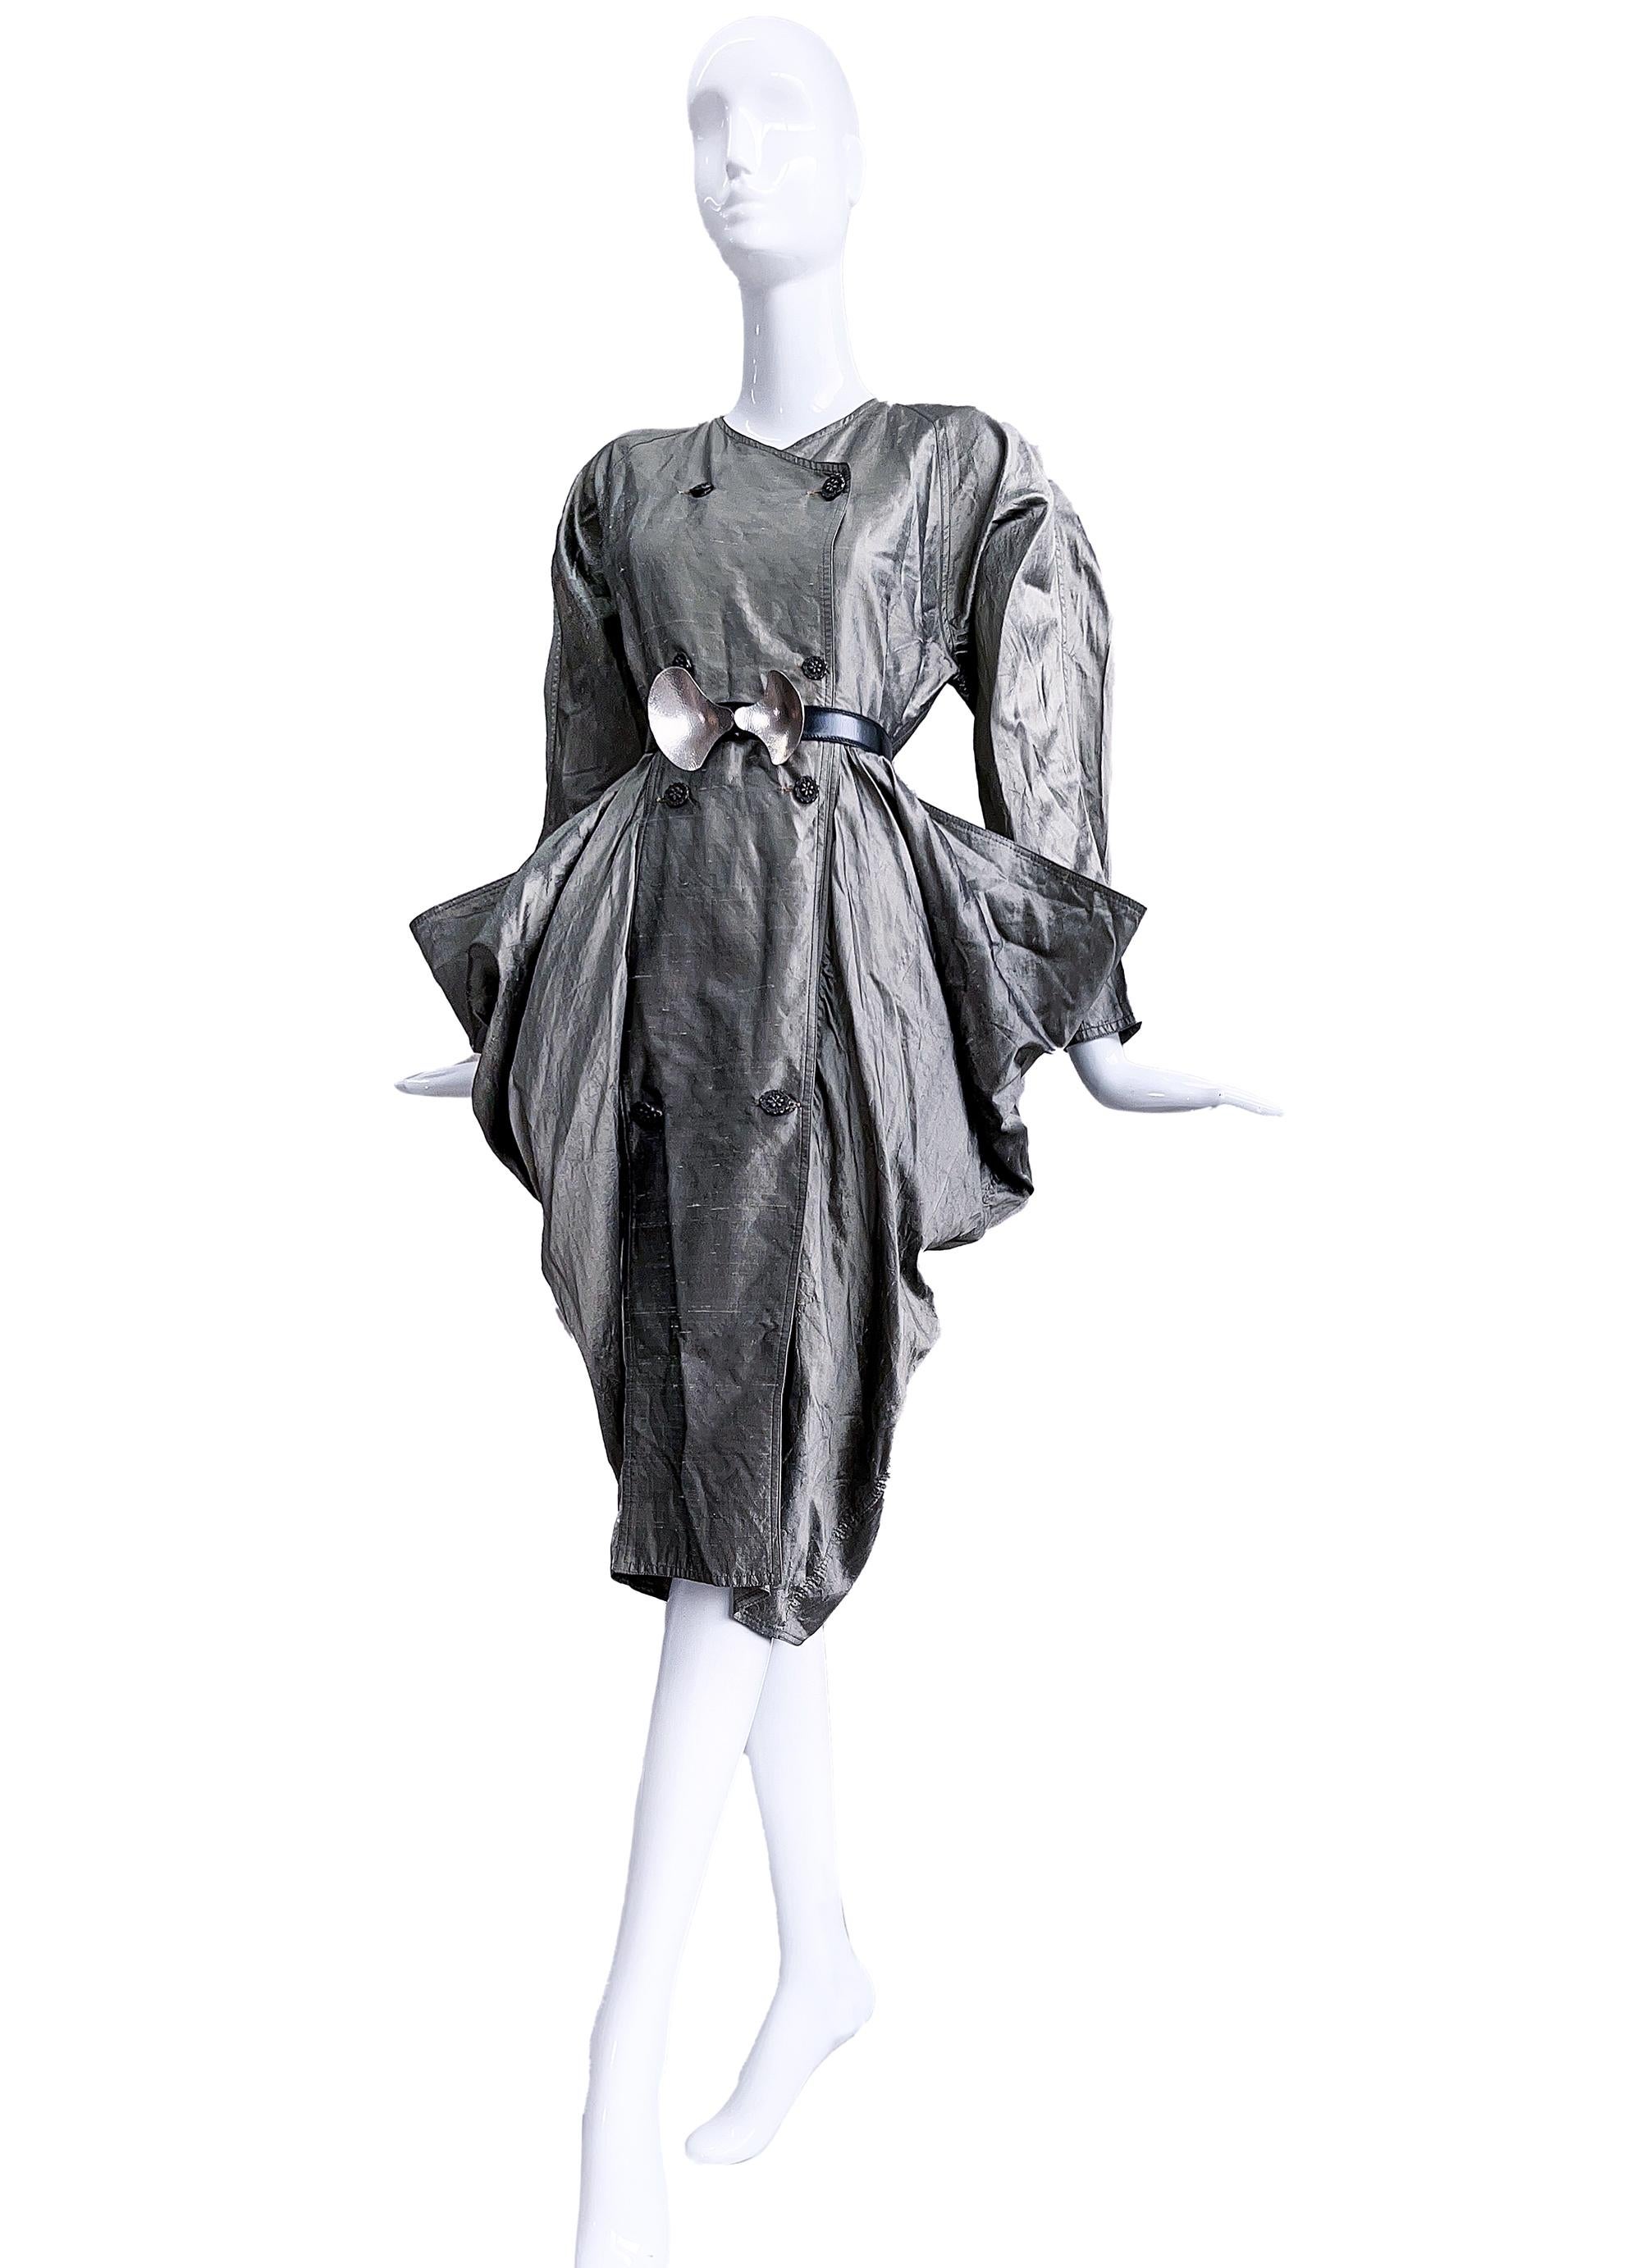 
Breathtaking Raw Silk dress with the most amazing sculptural shape!
One of a kind vintage Avant Garde dress made of luxurious silver raw silk. The sculptural fit and extraordinairy shape is breathtaking. Beautiful vintage Italian Designer piece.